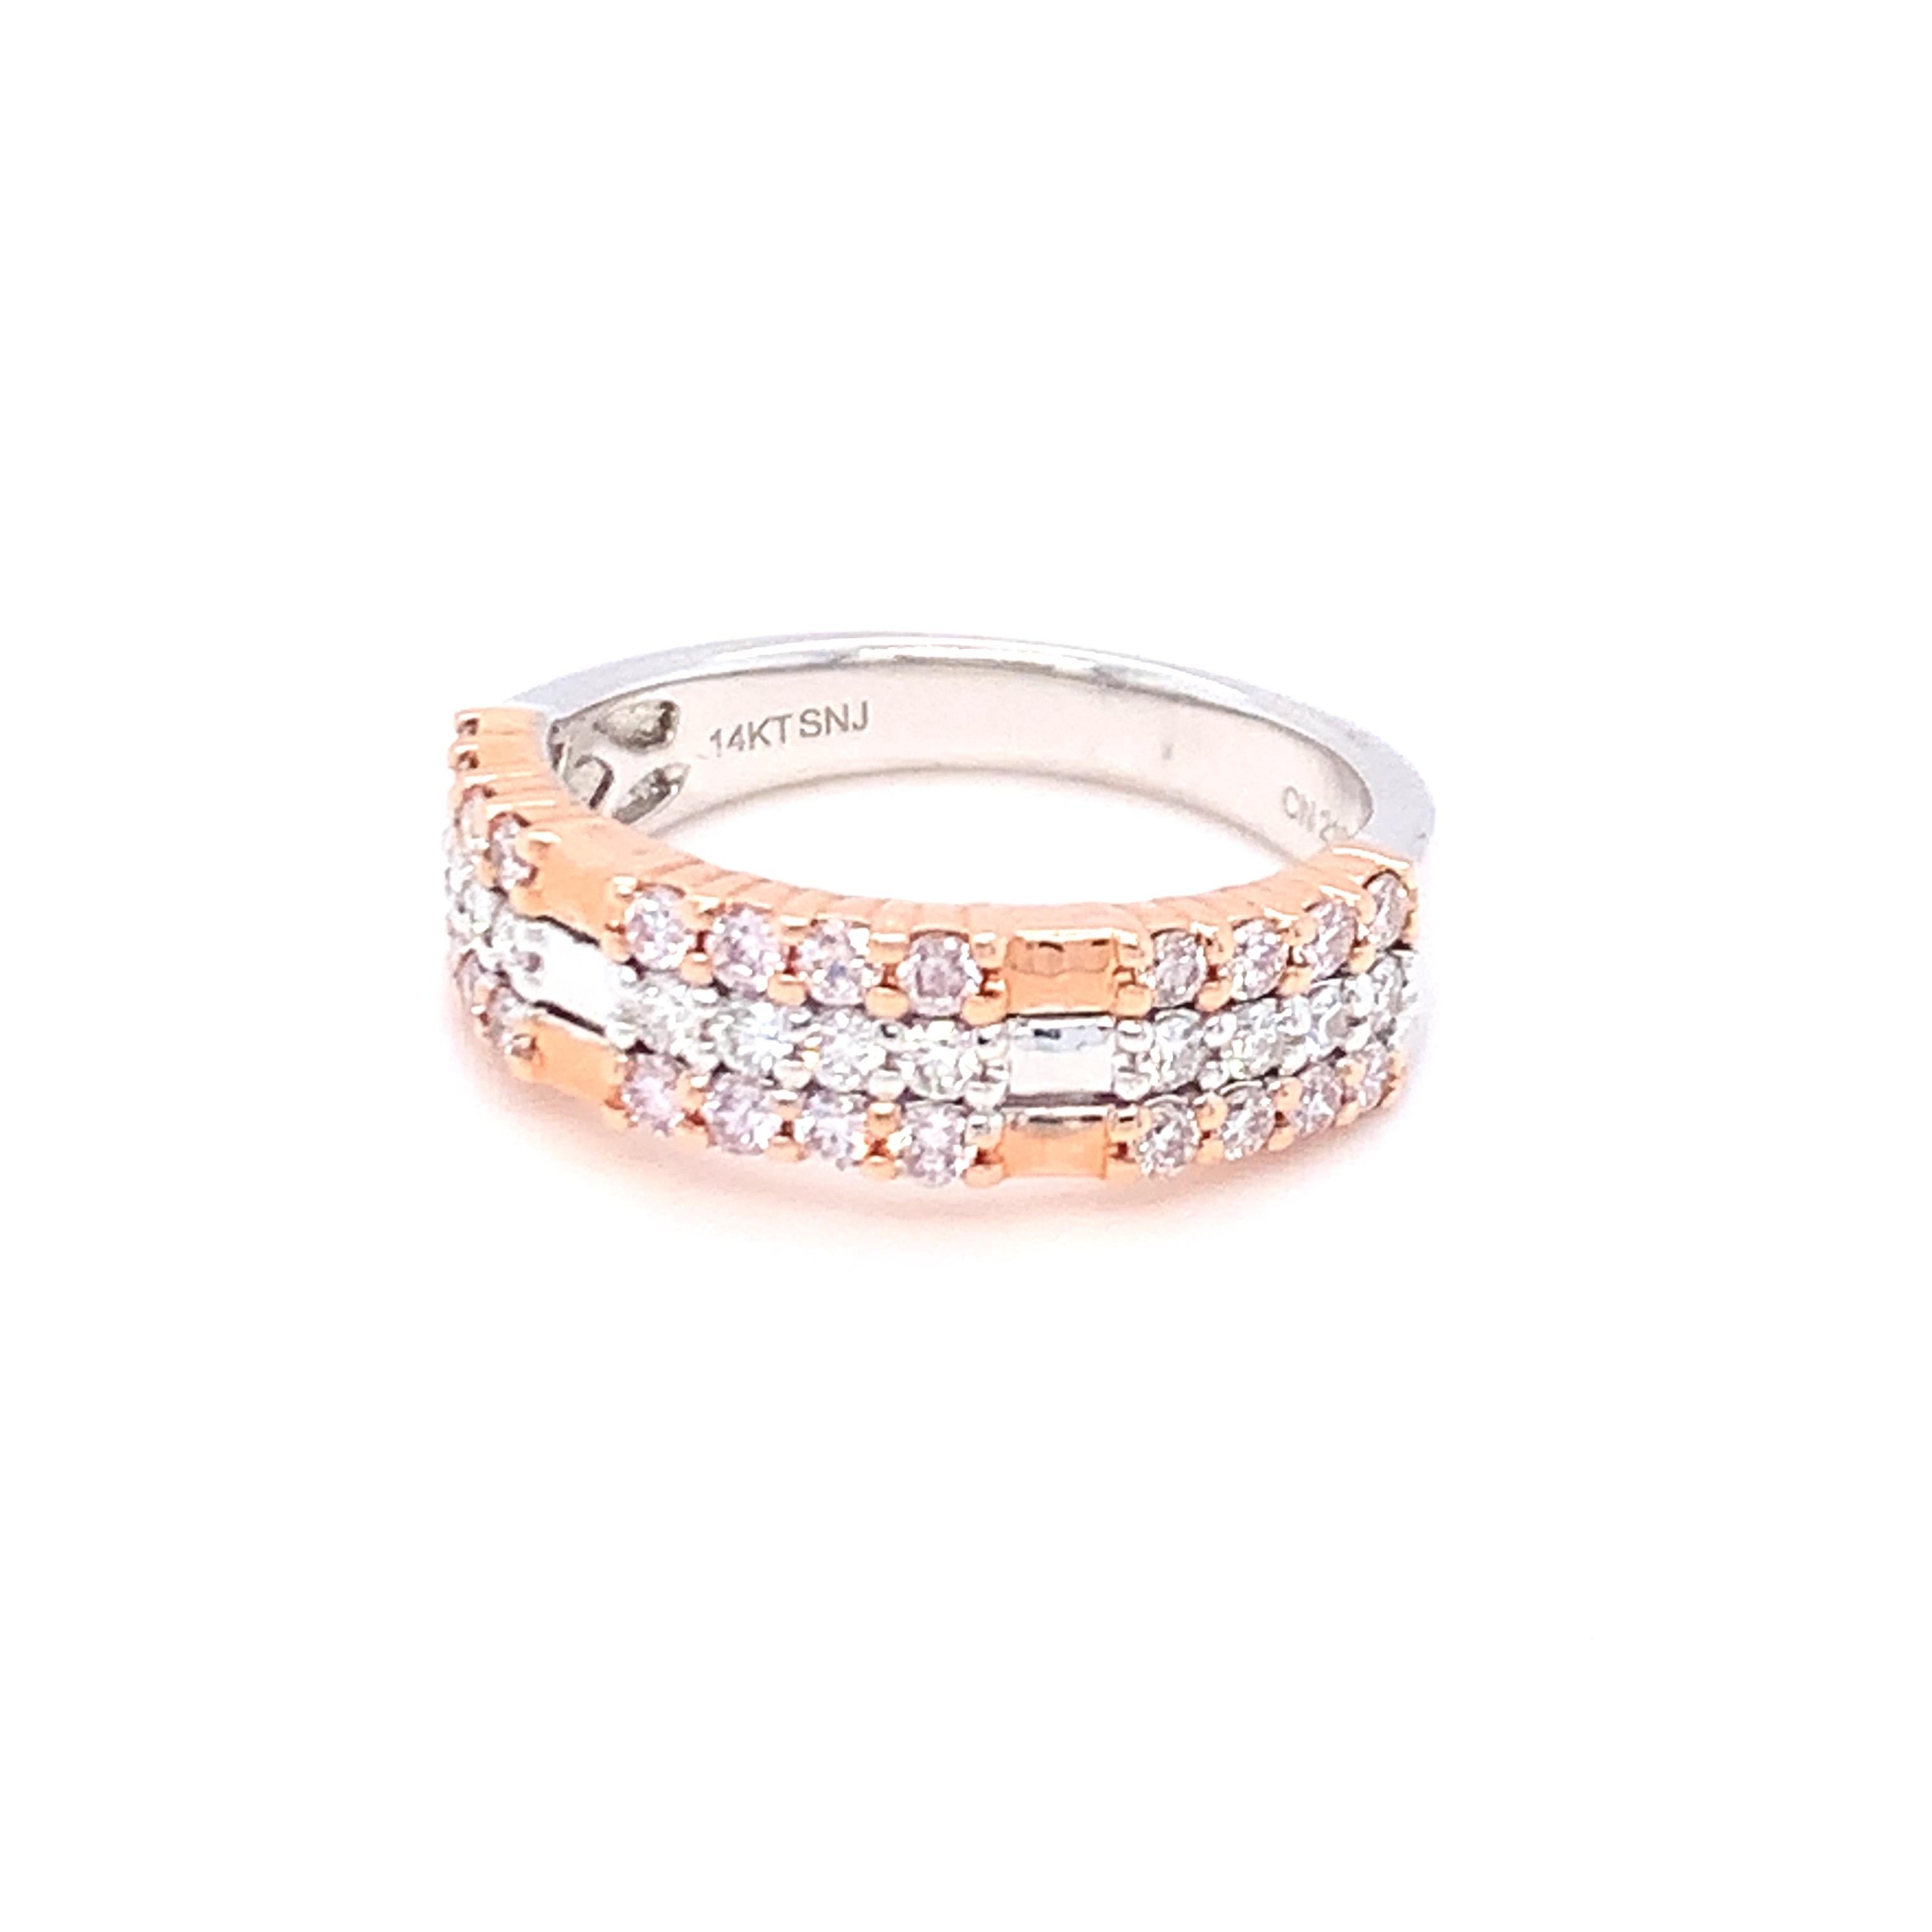 0.69 Carat Pink & White Diamond Band Ring in 14k Two Tone Gold For Sale 2